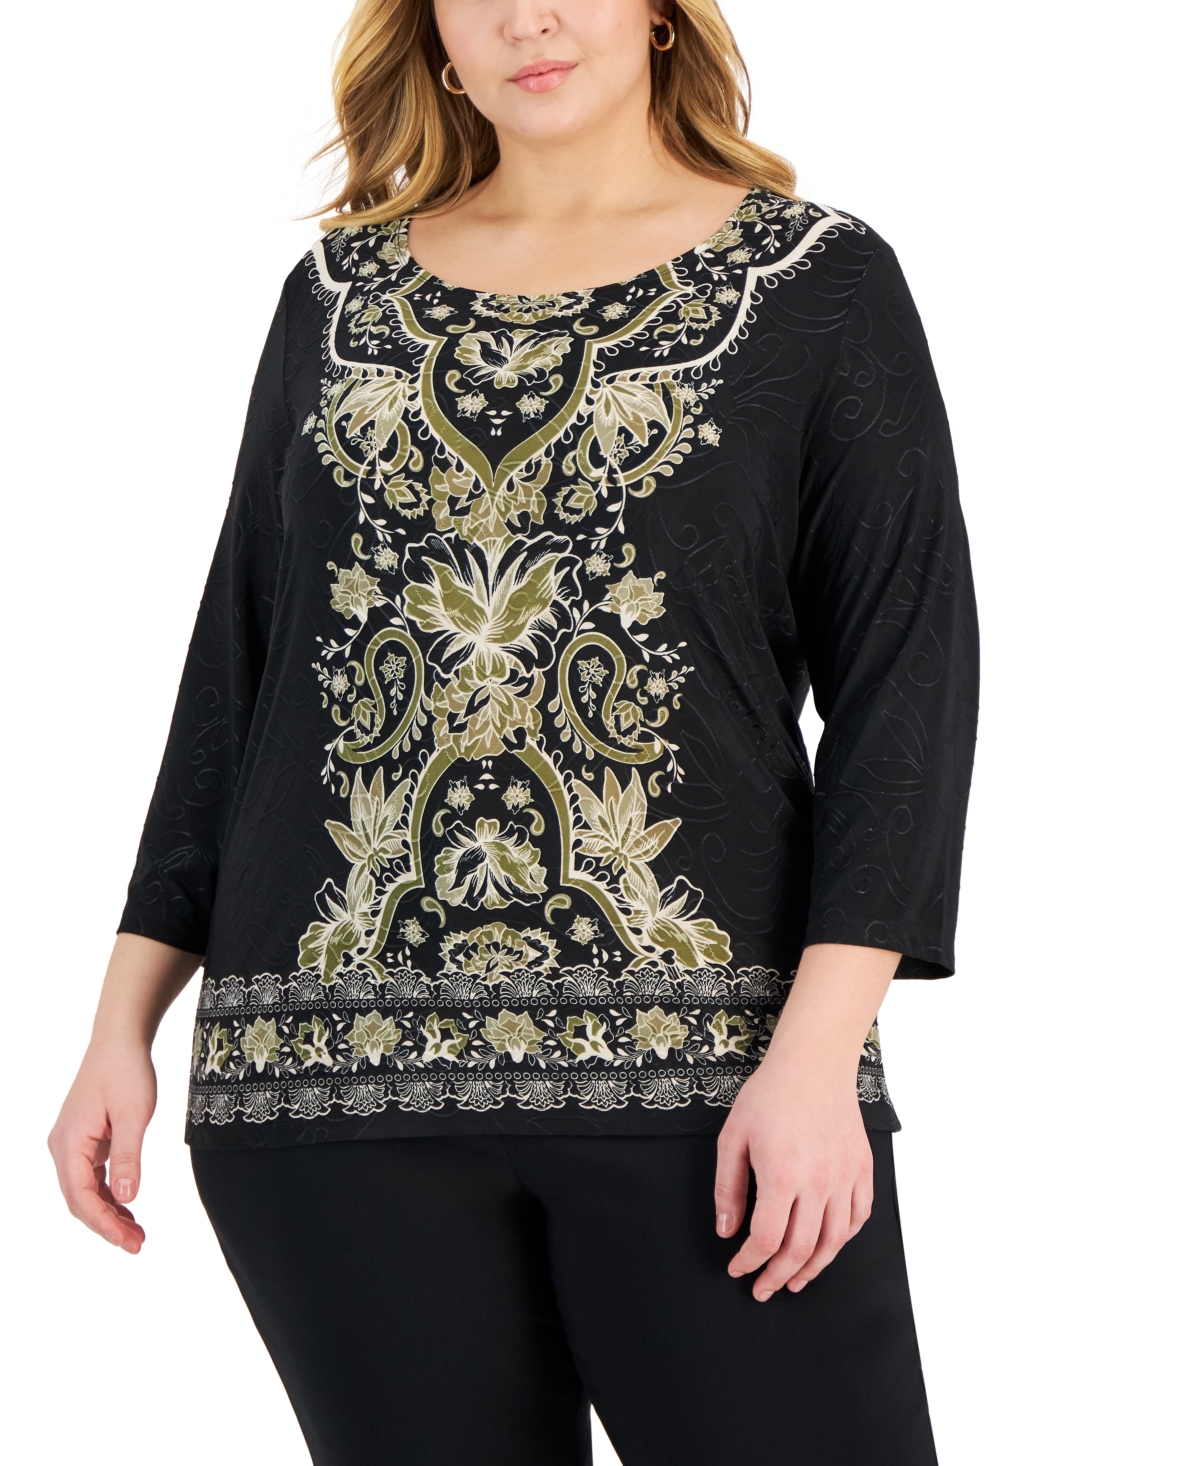 JM Collection Plus Size Solid Swing Top, Created for Macy's - Macy's